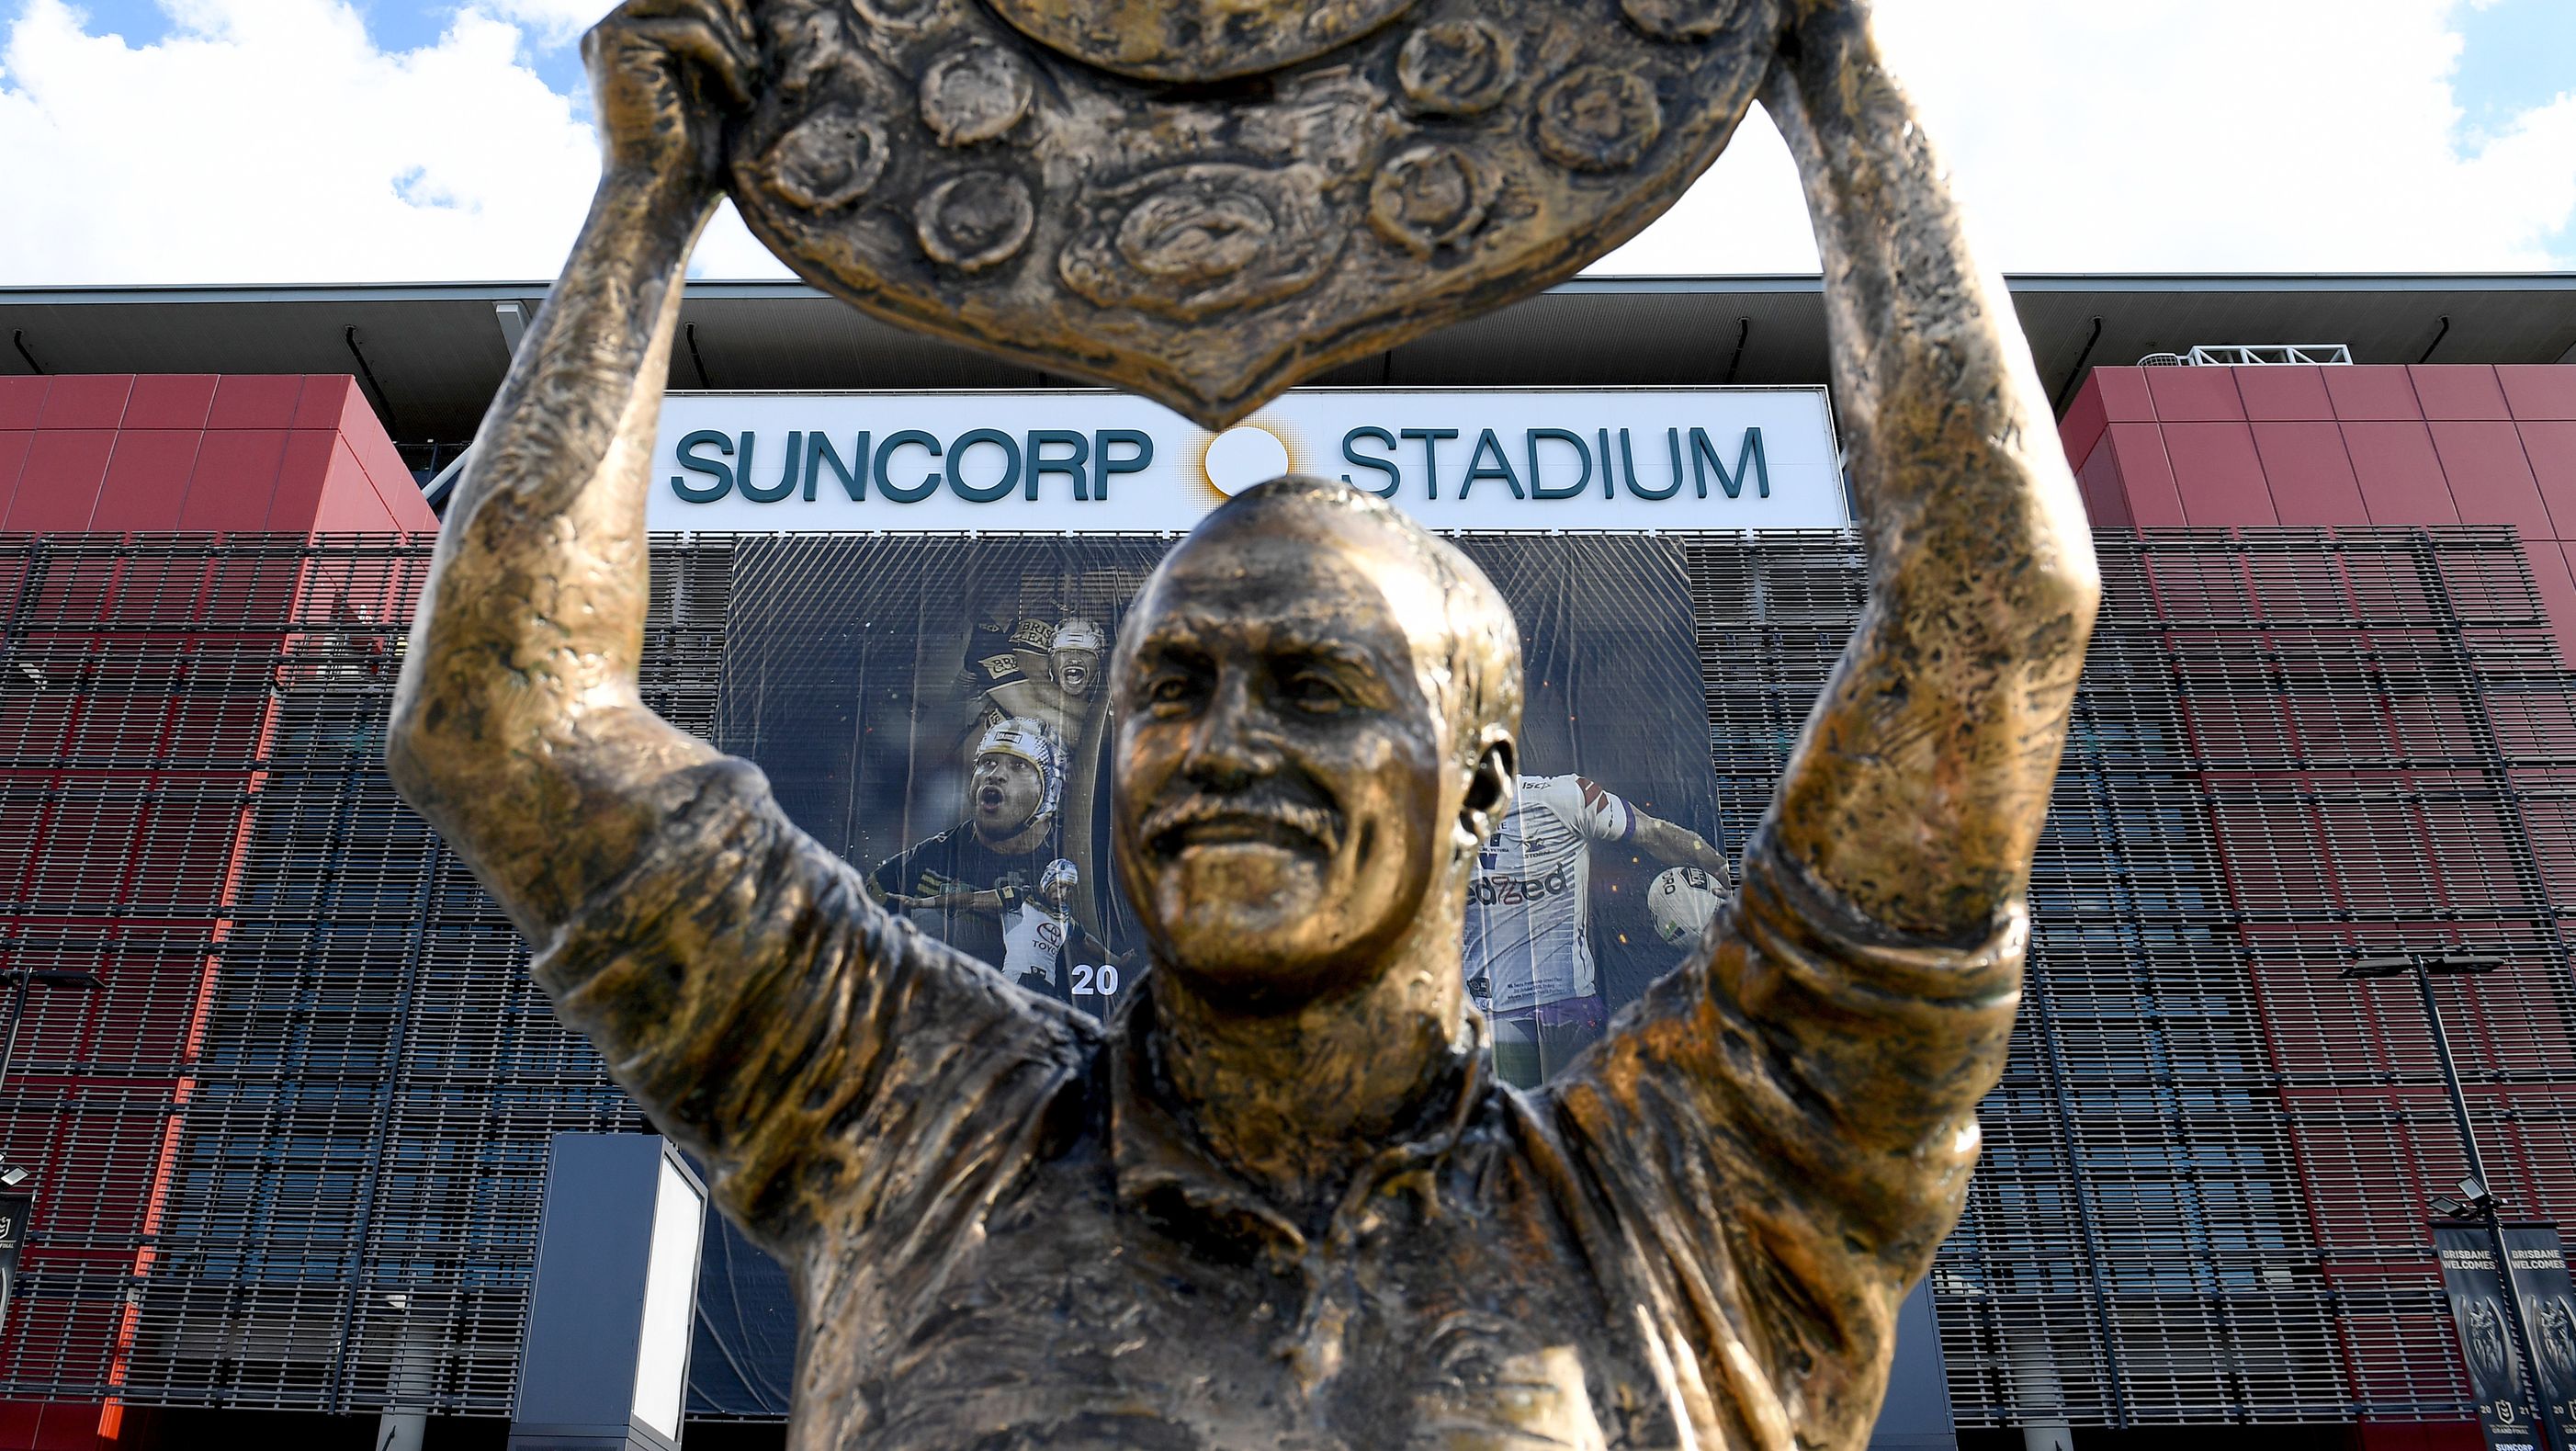 A view of the stadium through the Wally Lewis statue.